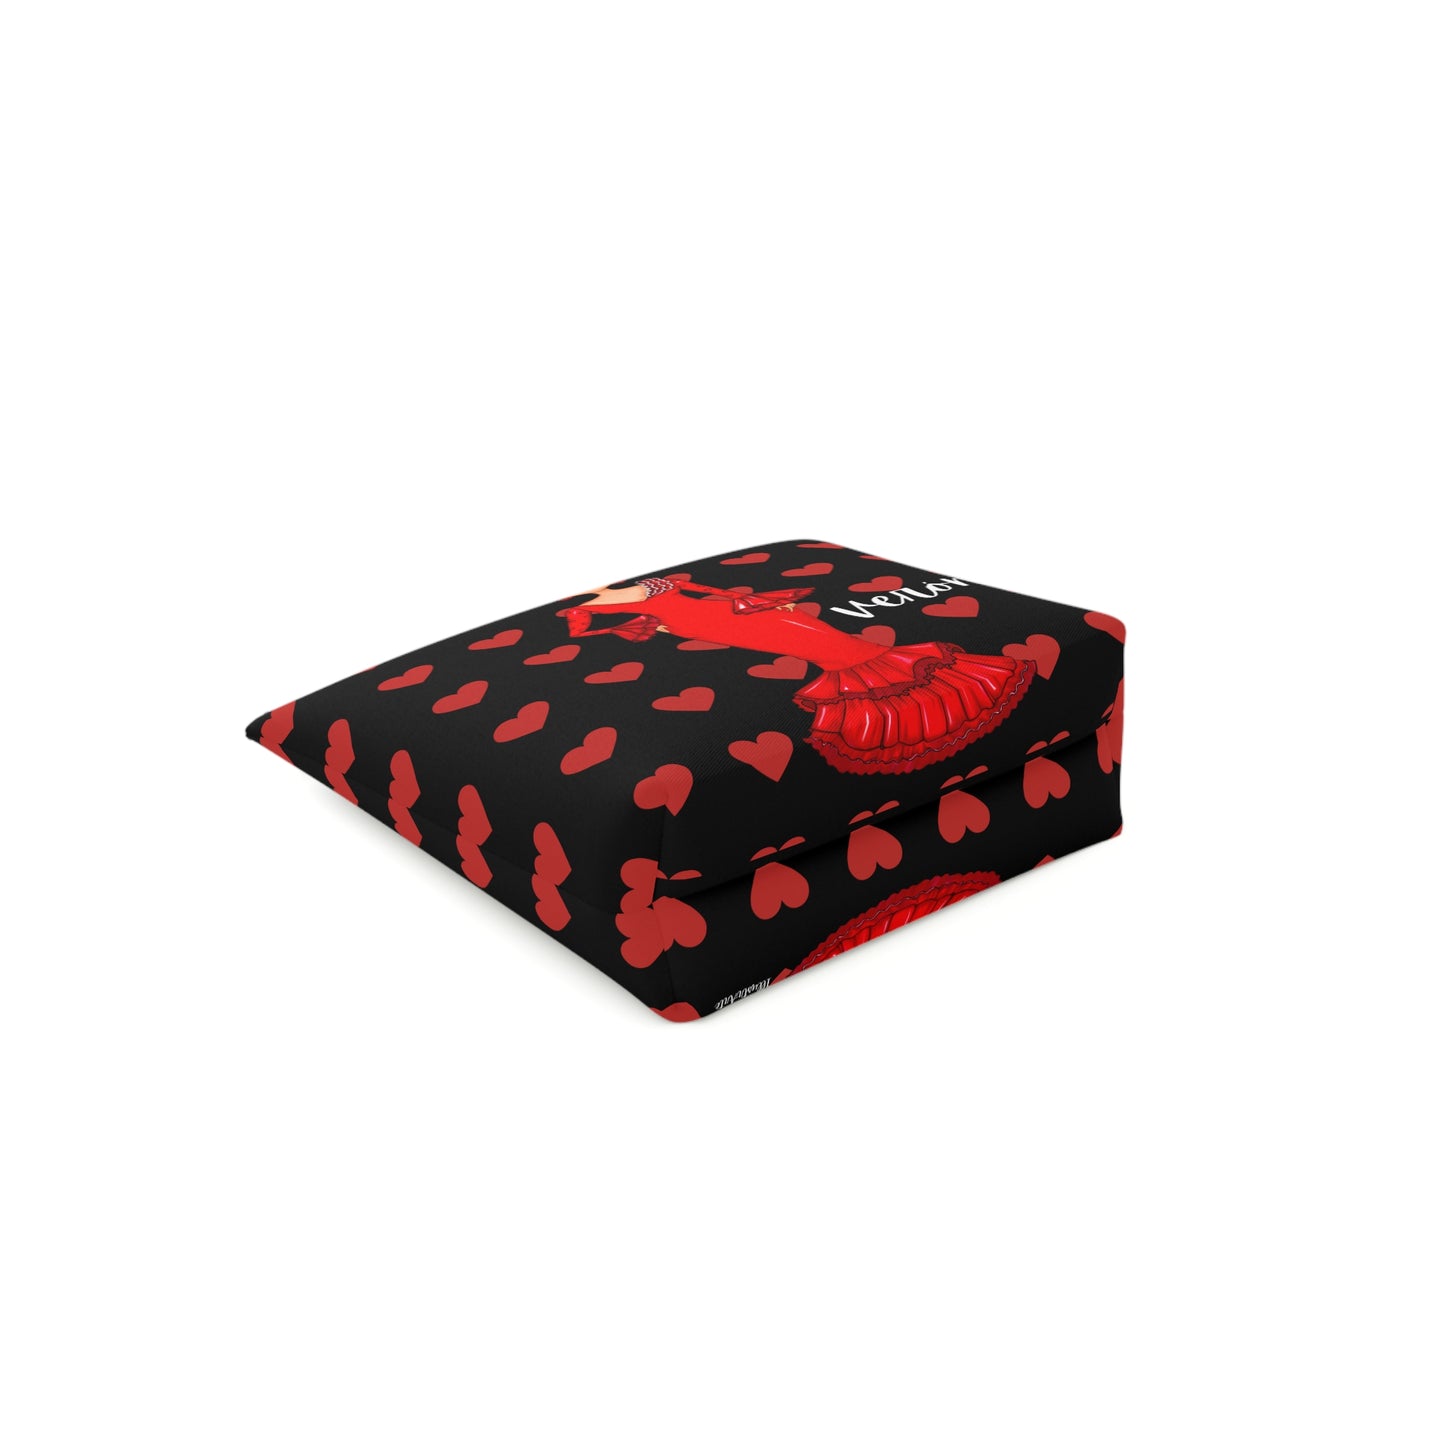 a black and red box with red hearts on it